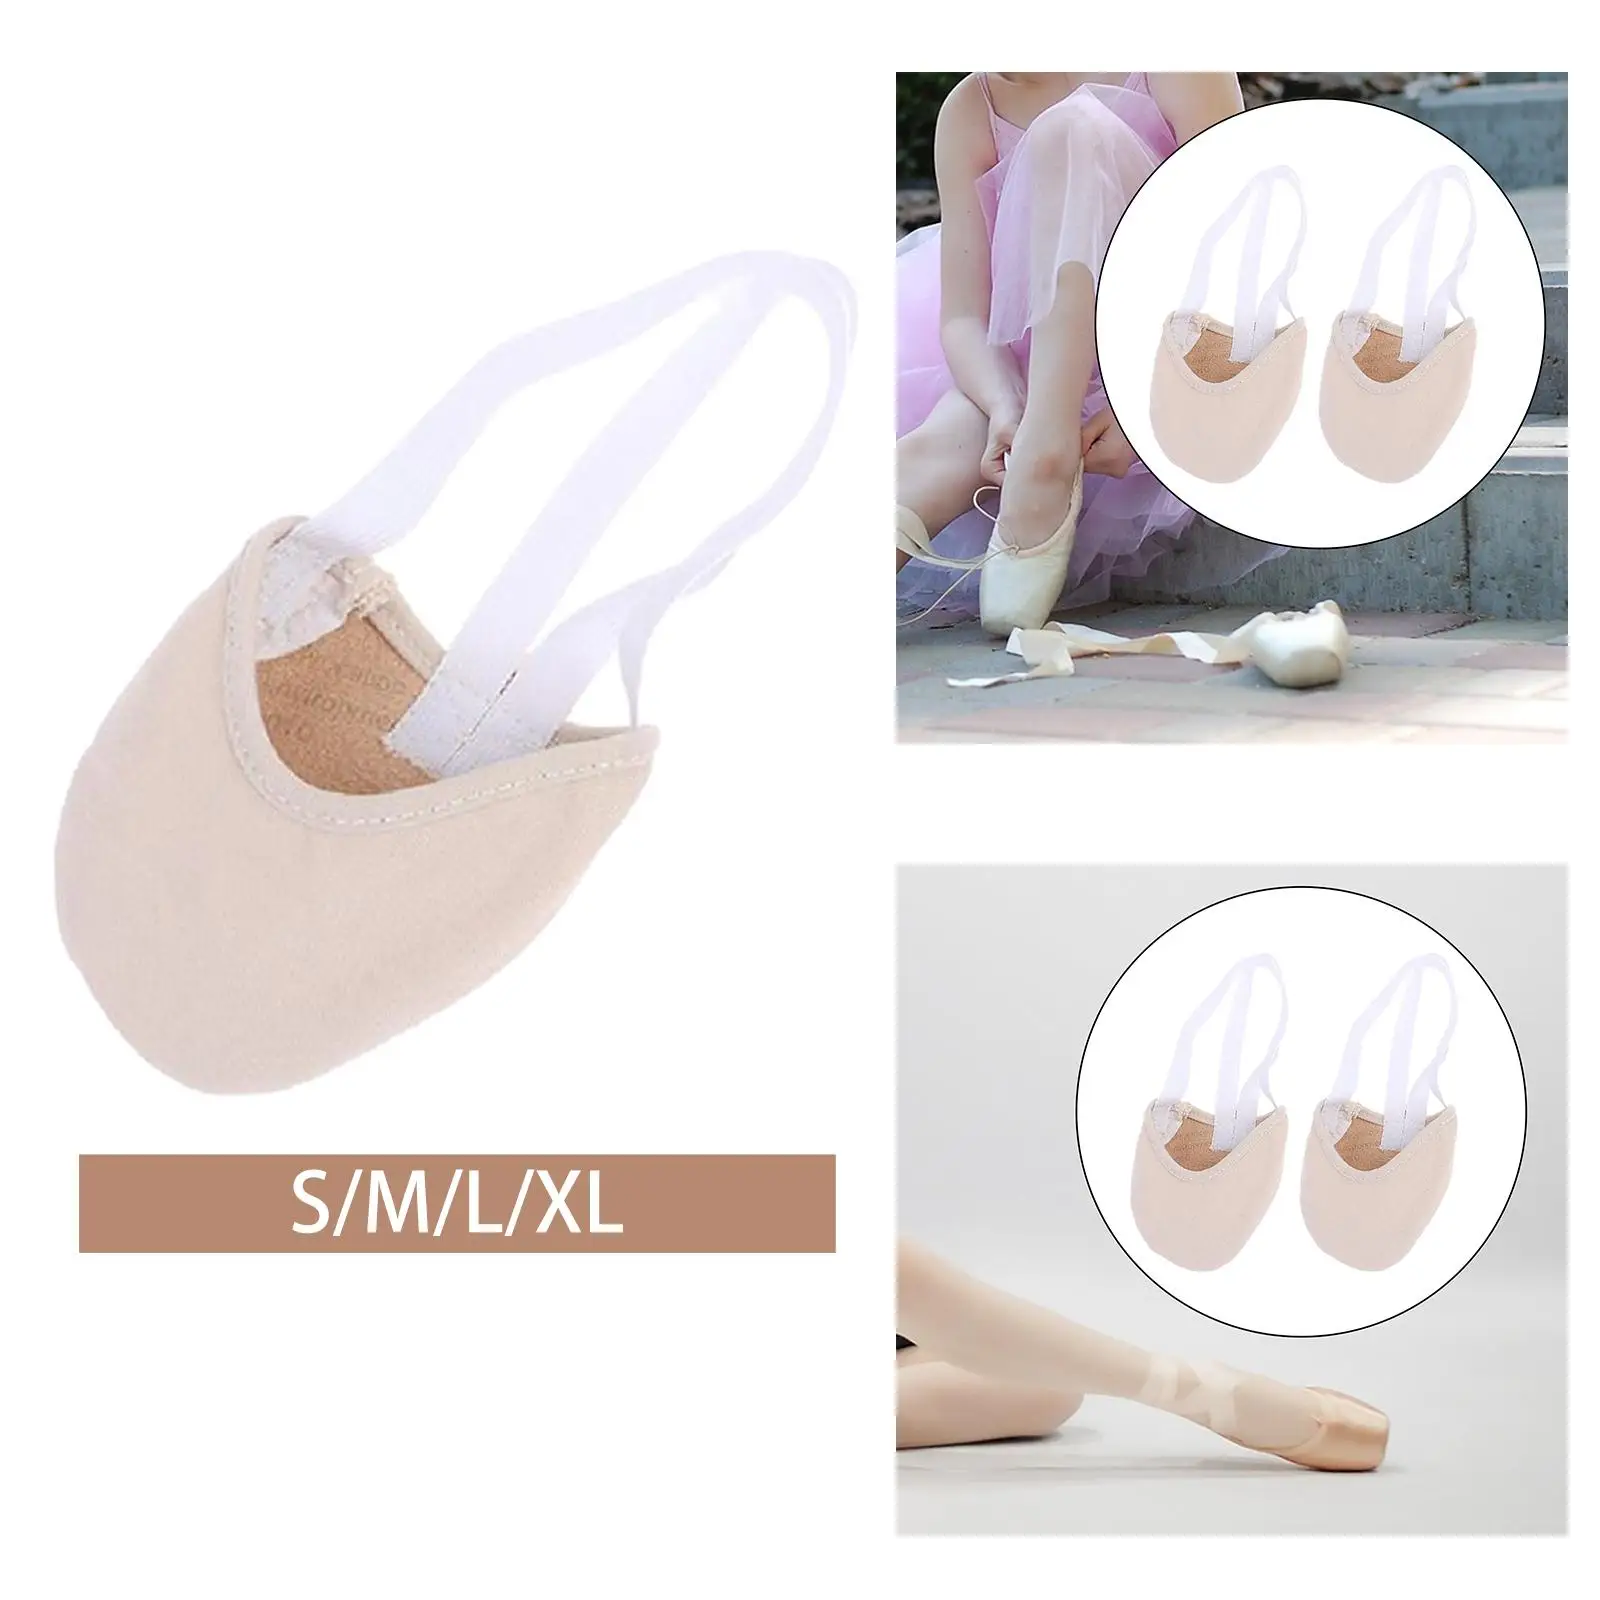 Half Sole Dance Shoes Gymnastic Shoes Ballet Shoes for Jazz Turning Lyrical